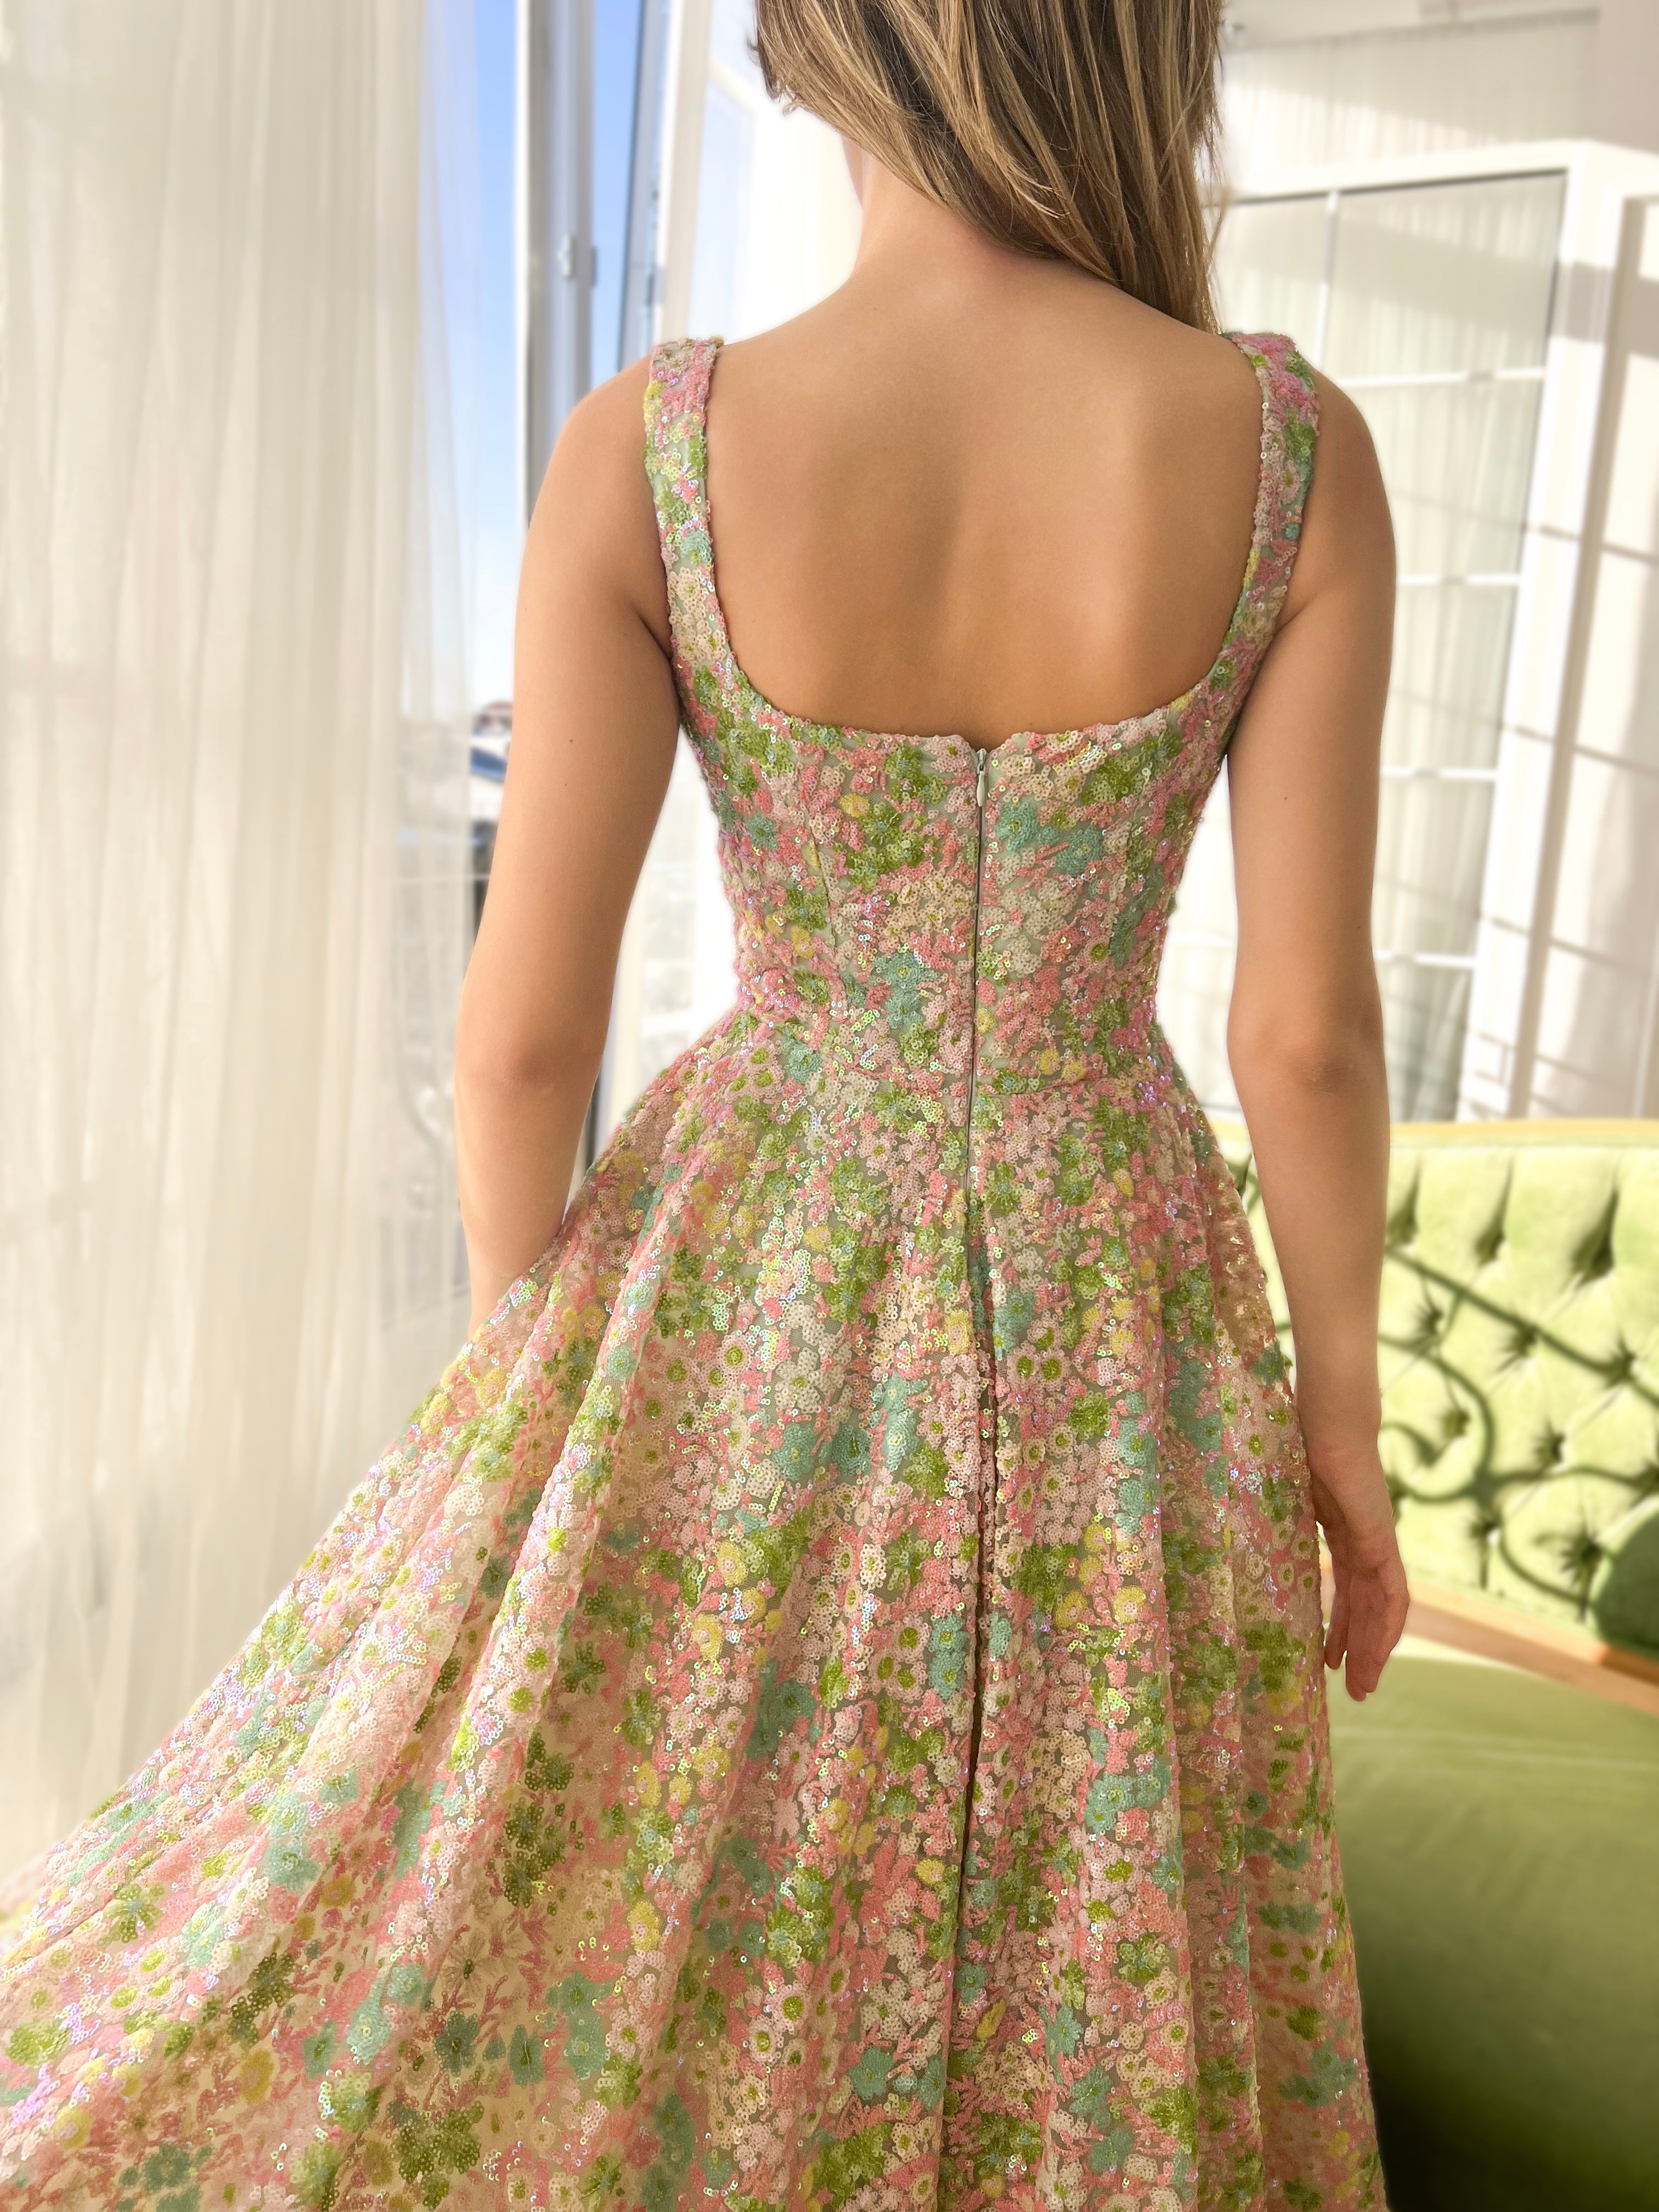 Colorful A-Line dress with embroidery and flowers and straps